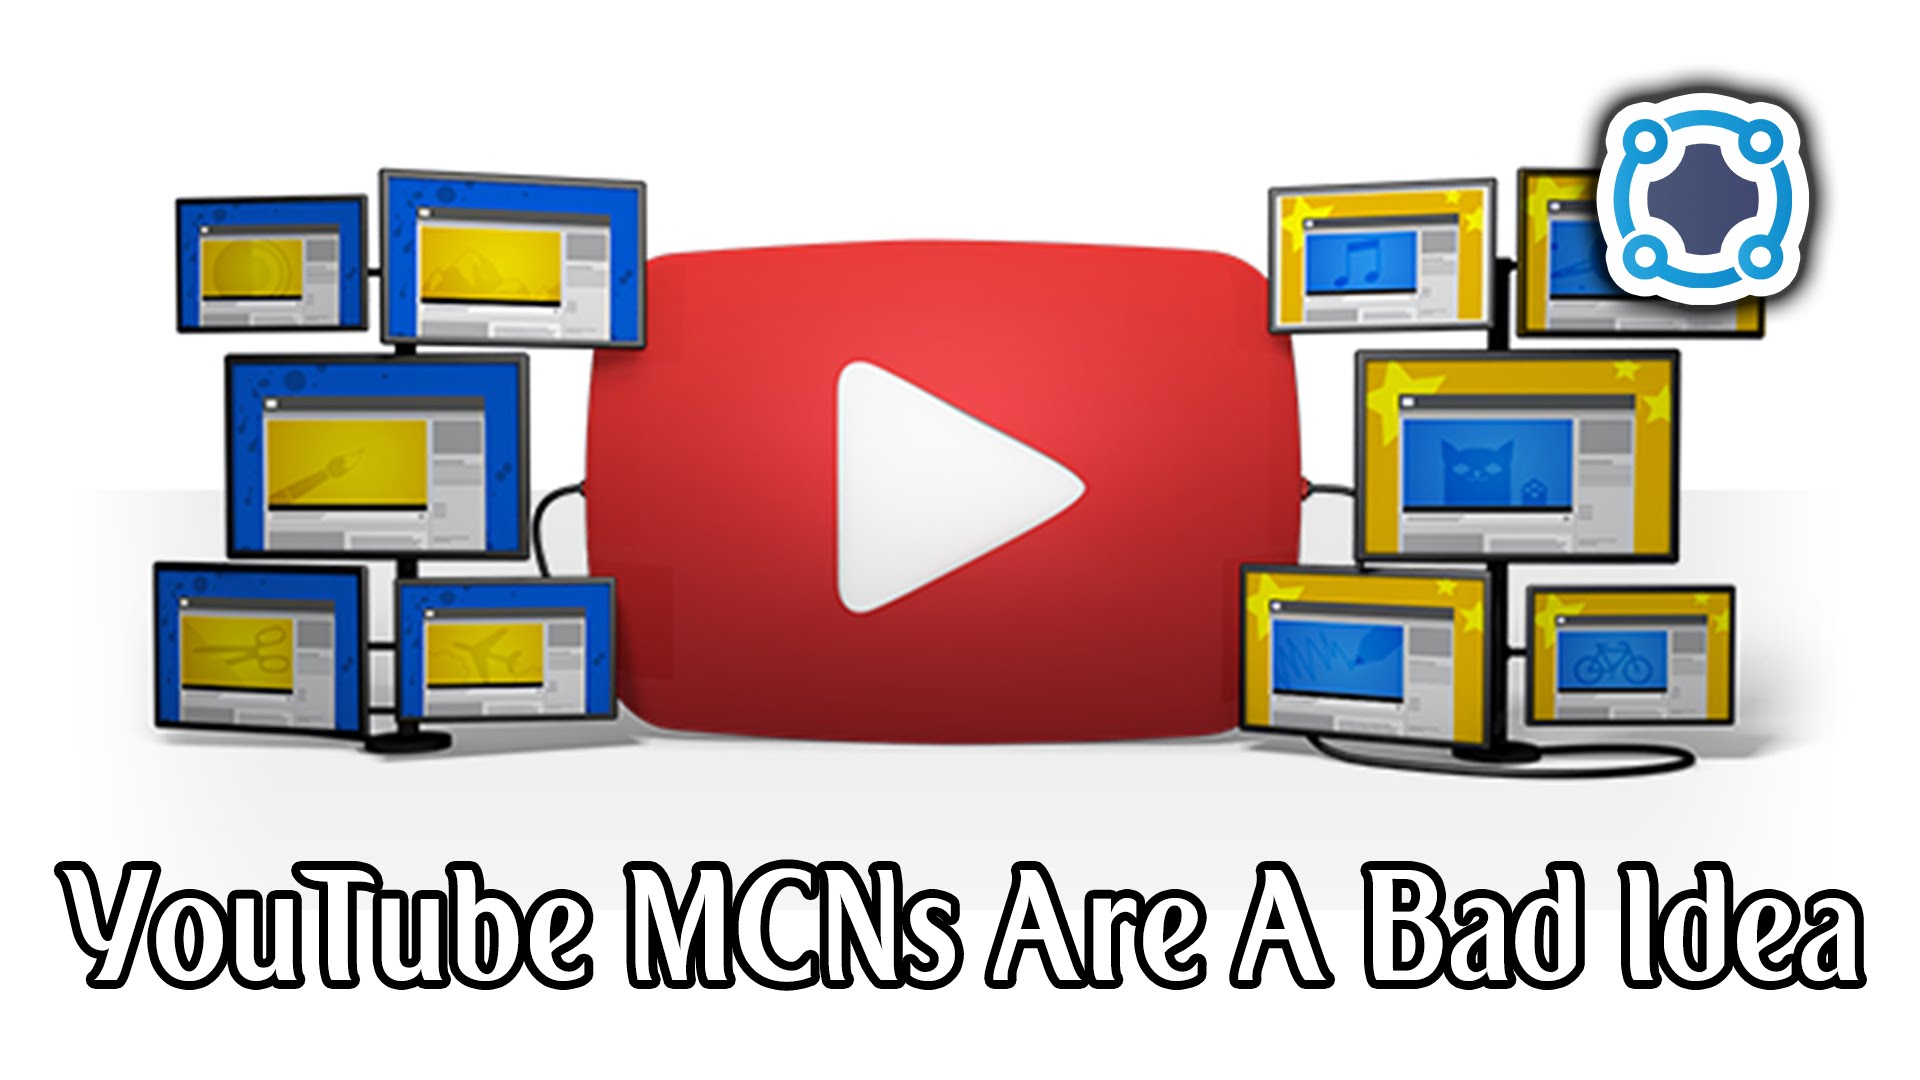 YouTube MCNs (Multi-Channel Networks) Are A Bad Idea